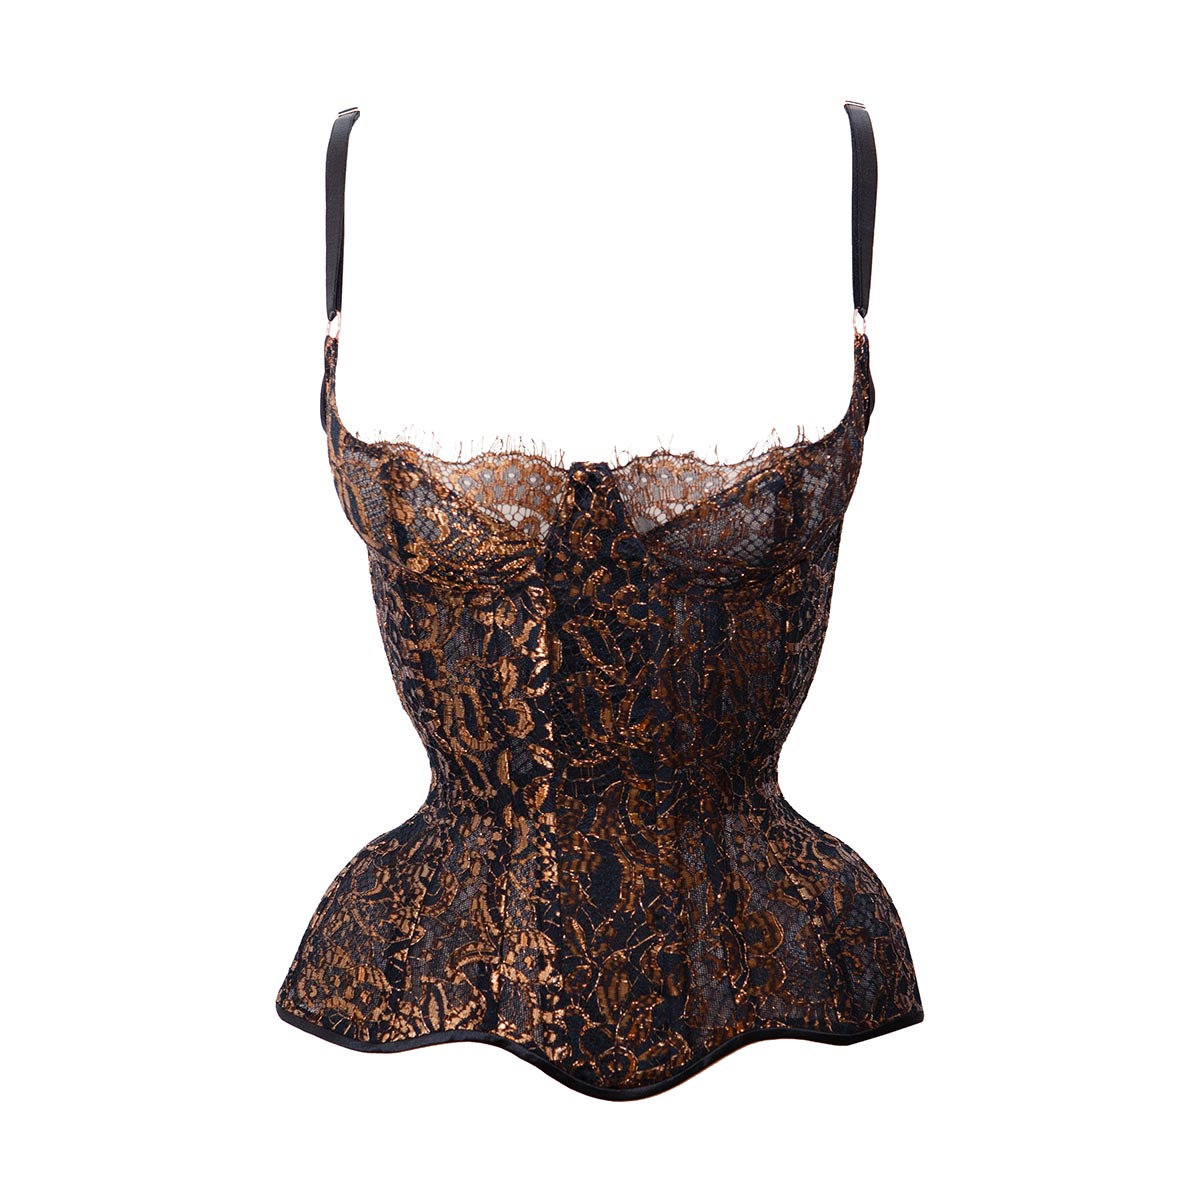 Beaded corset bra by reina-exclusive- - Corsets - Afrikrea